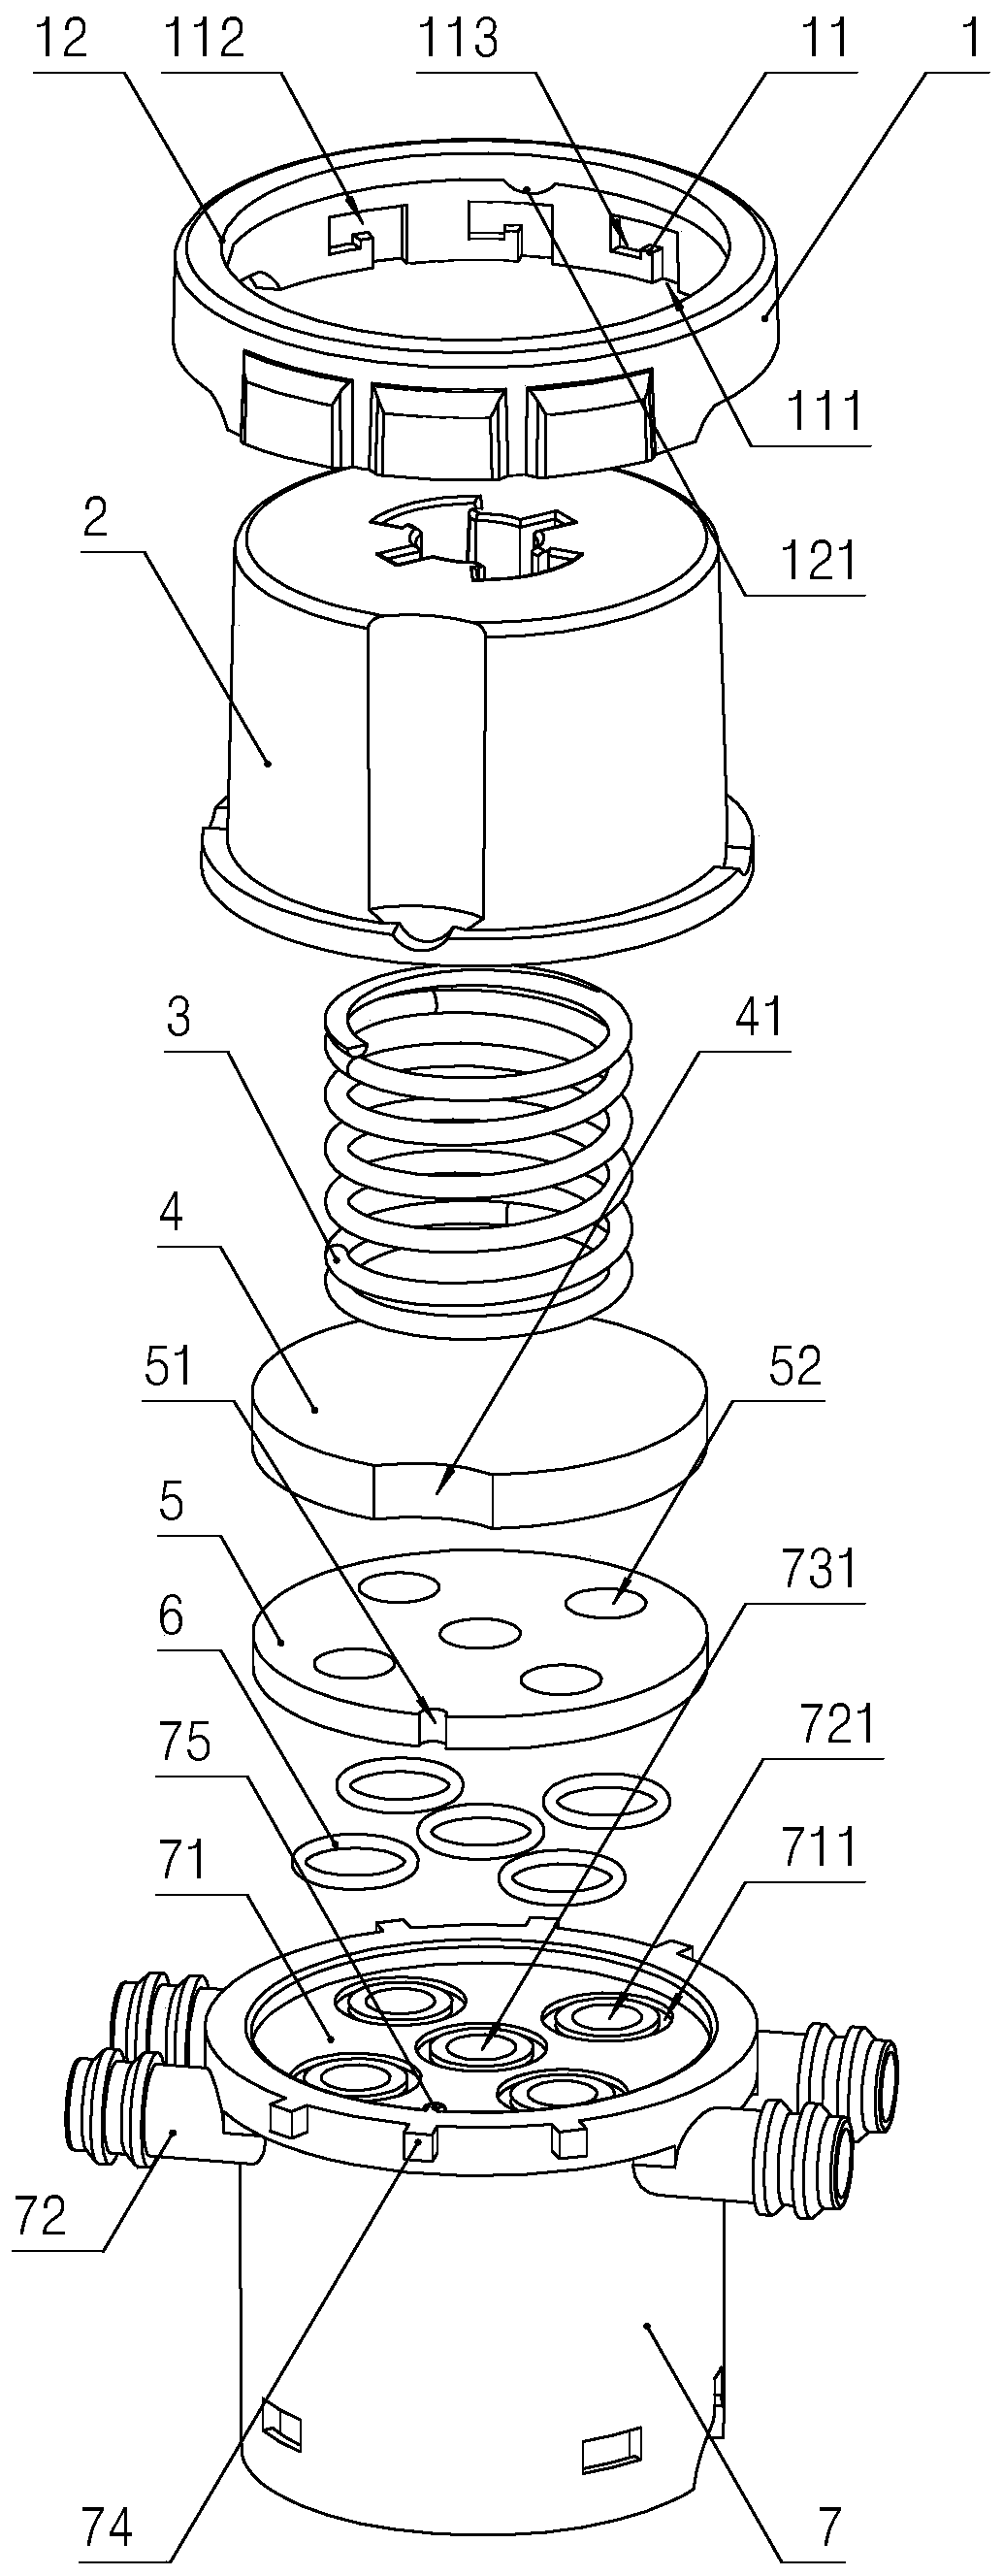 Confluence gating device